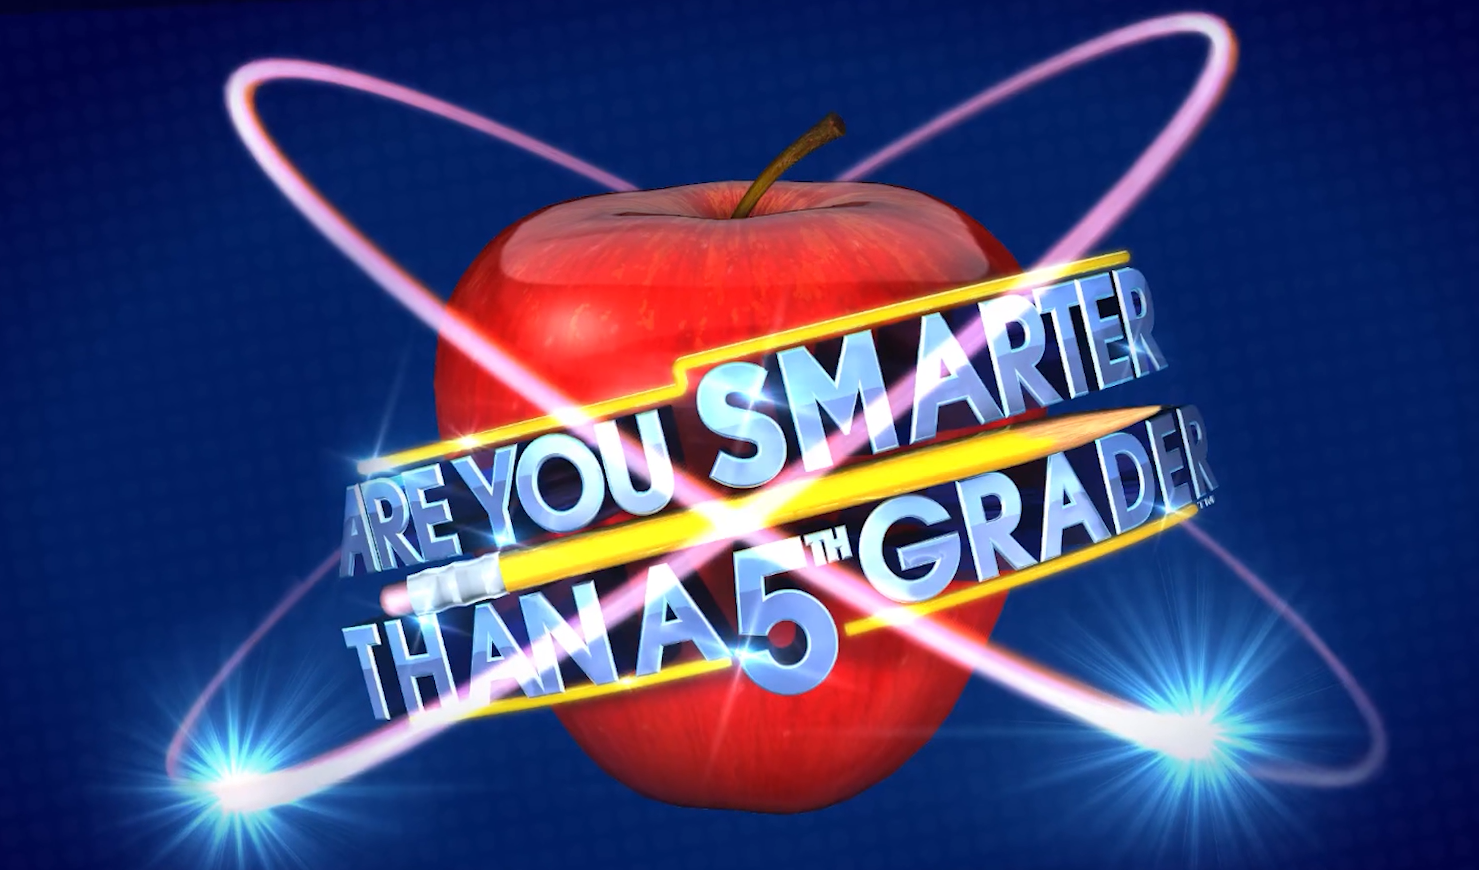 are-you-smarter-than-a-5th-grader-free-download-gametrex